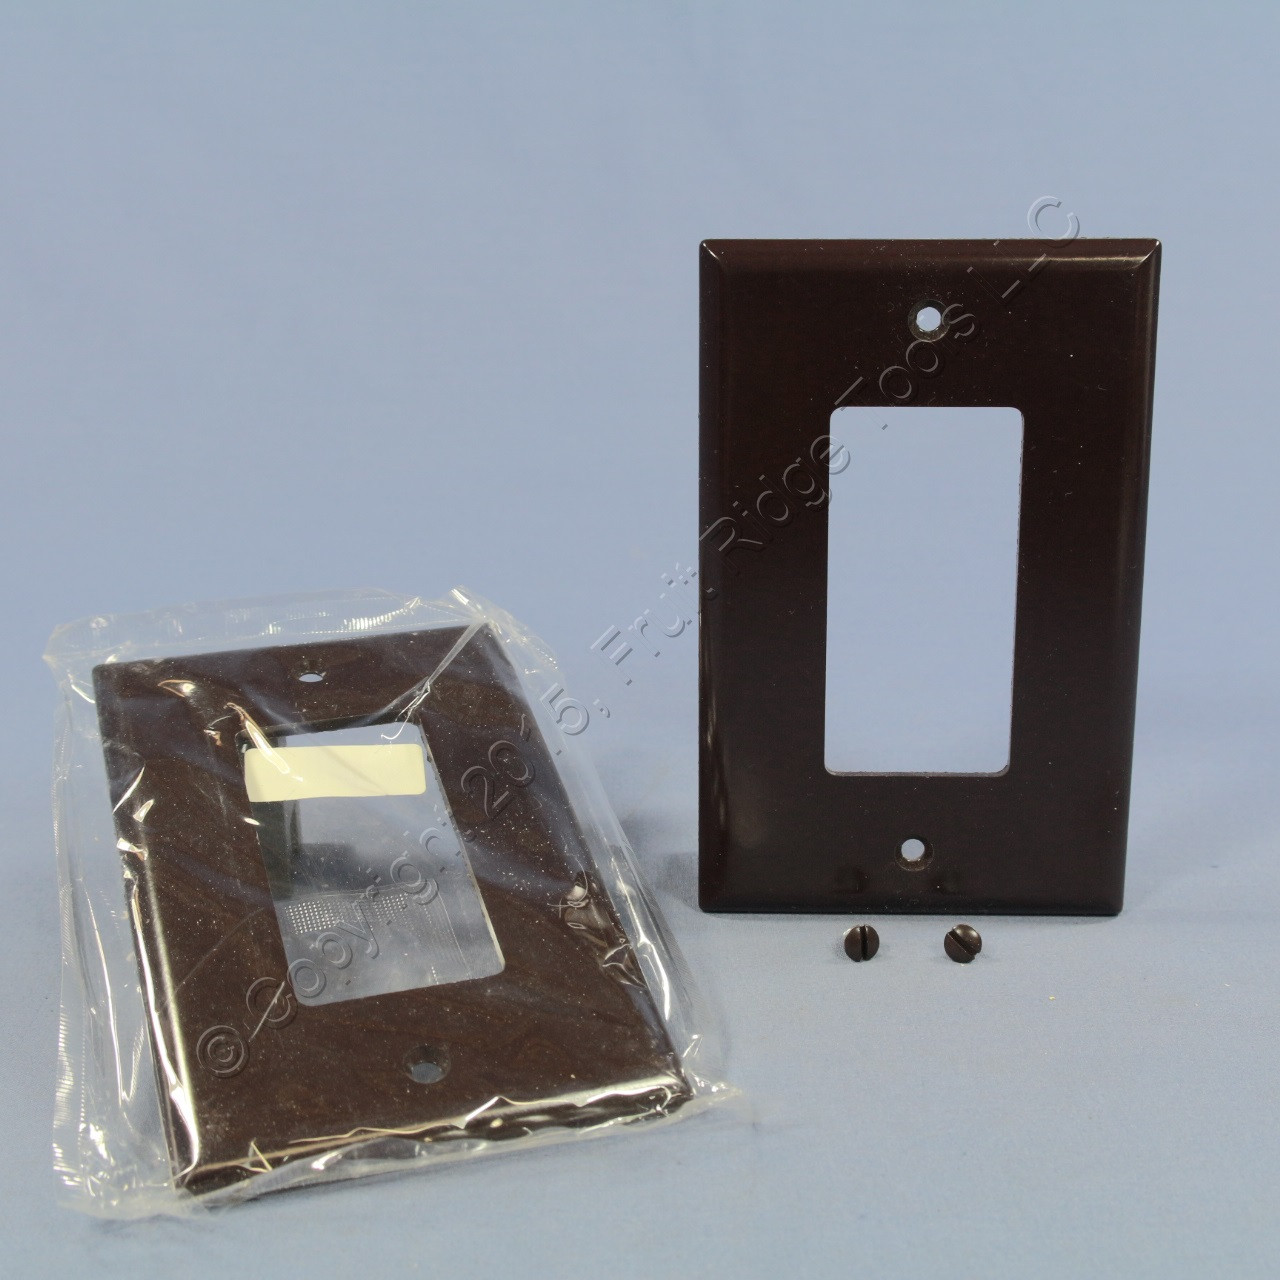 2 Eagle Brown 1G Decorator Mid-Size Wallplate GFCI Rocker Switch Covers 2051B 